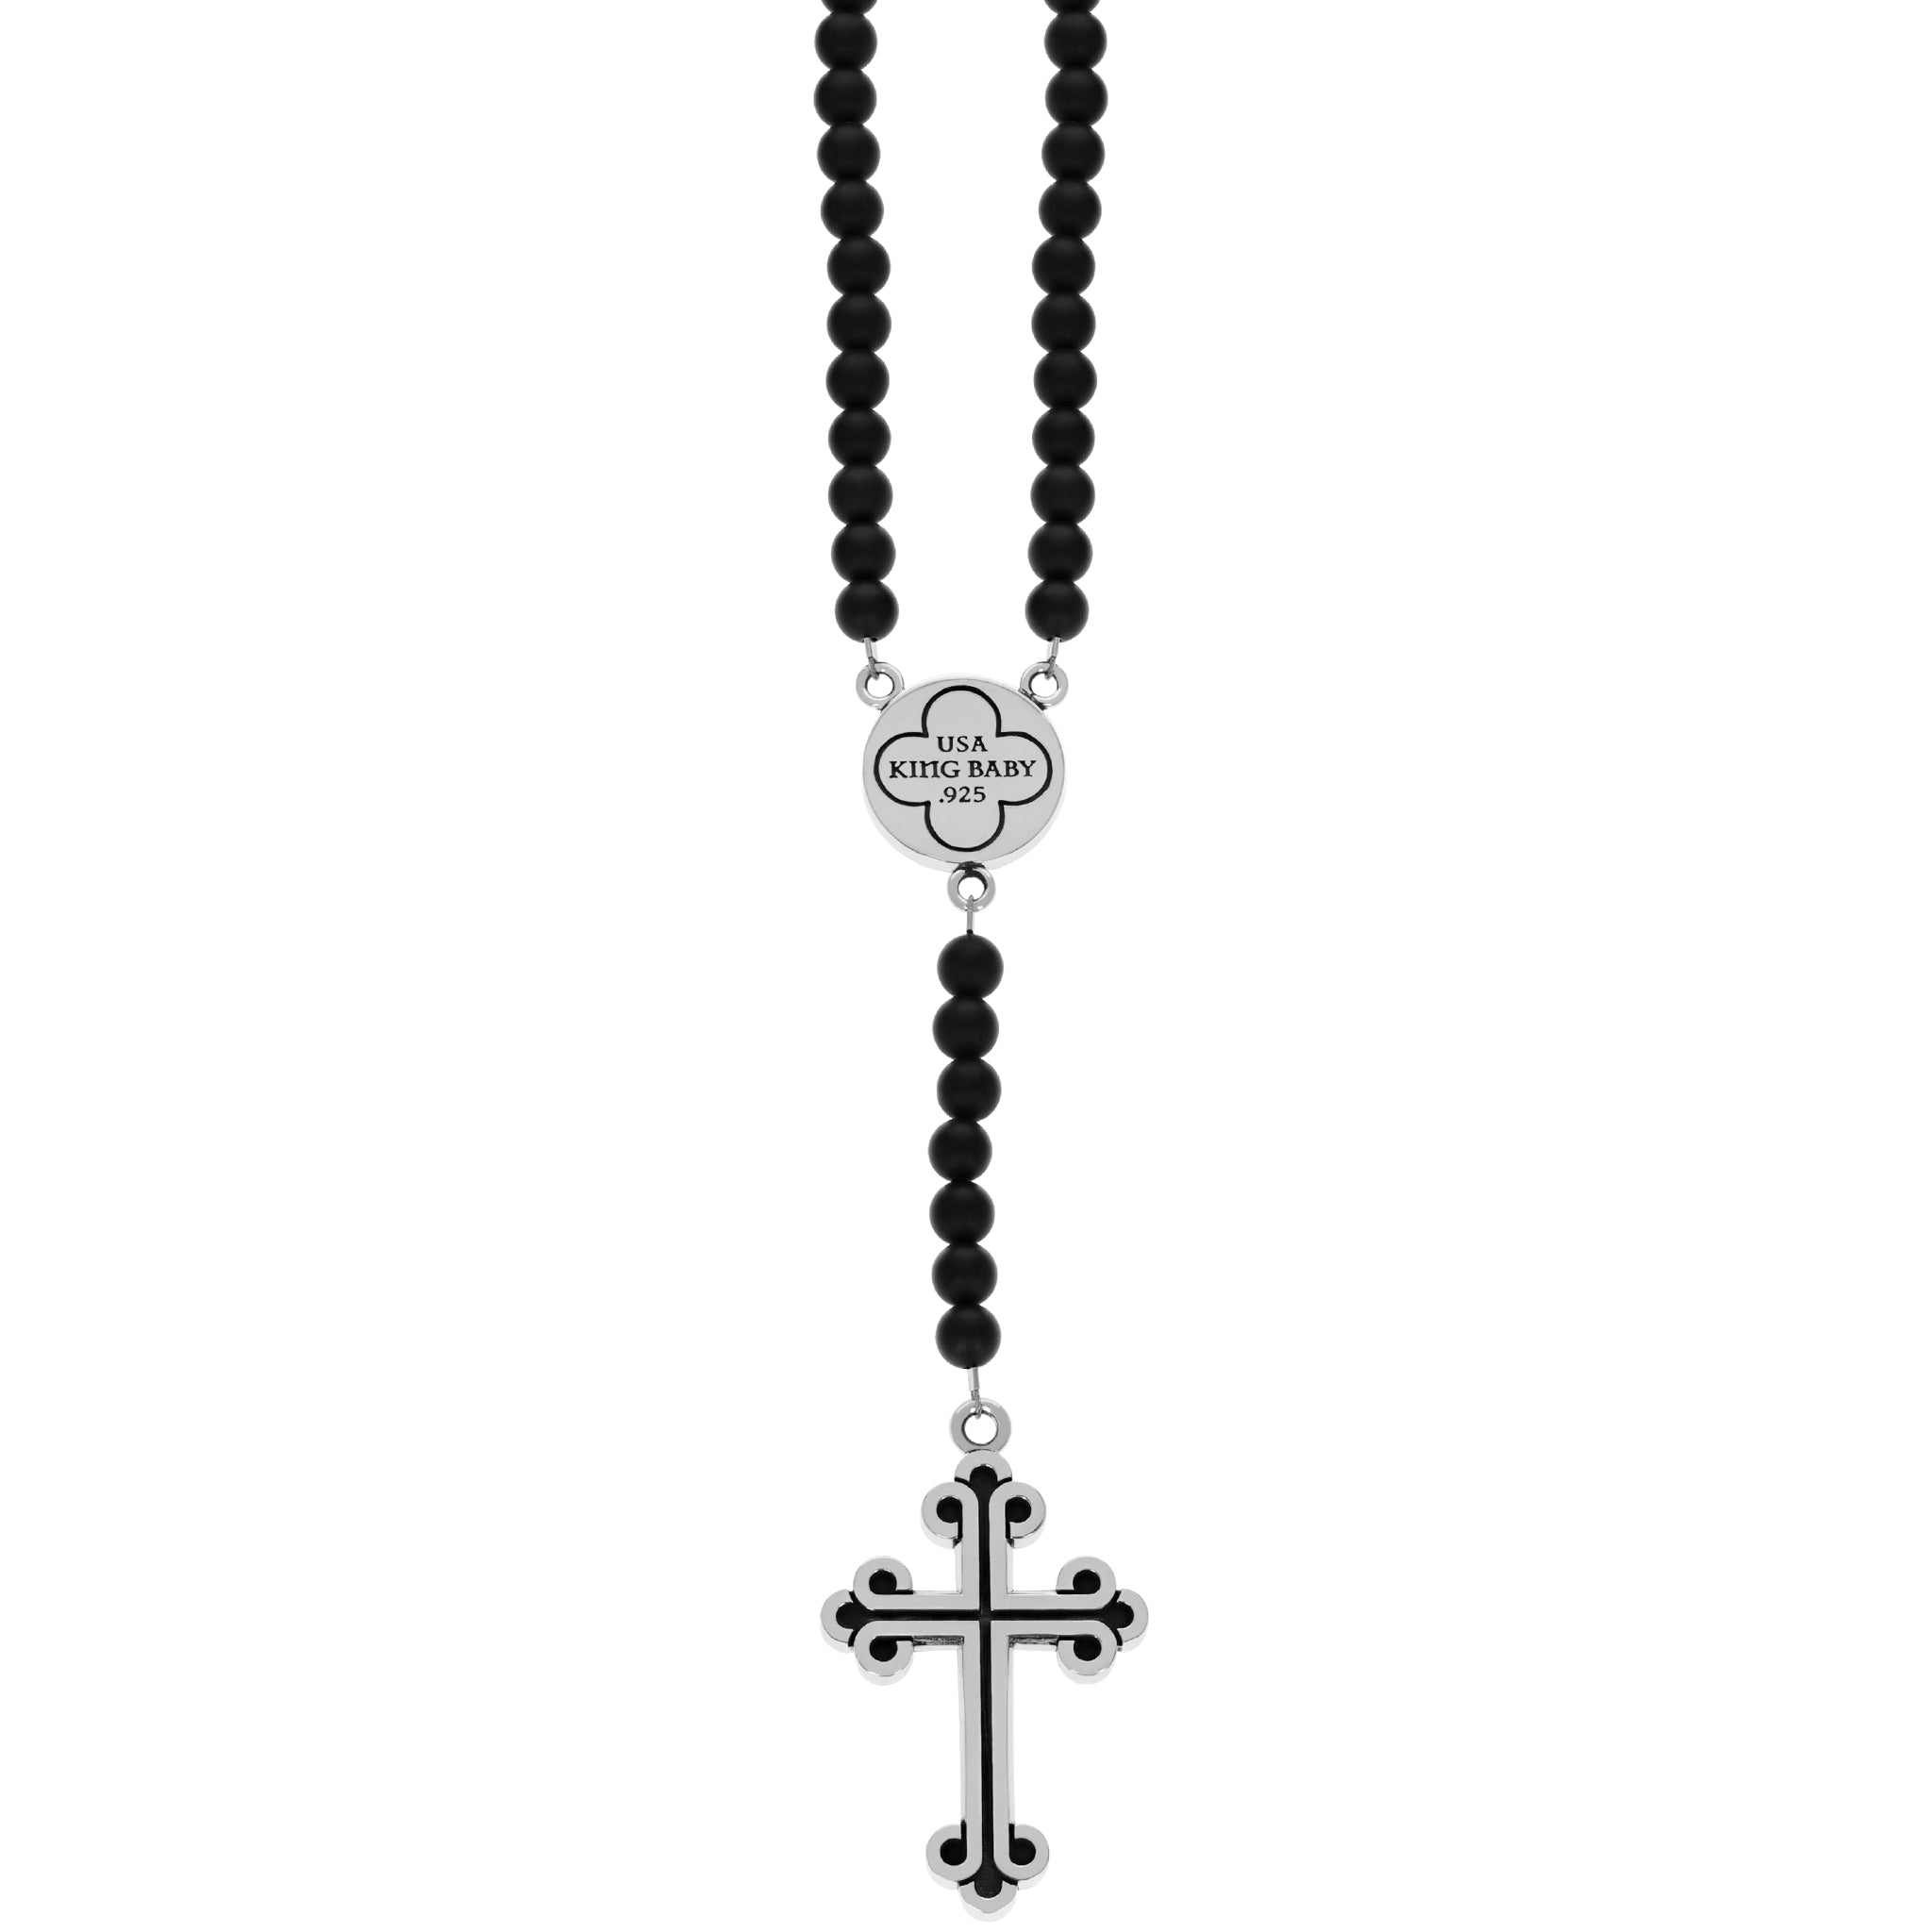 Onyx Bead Rosary w/ Gold Alloy Symmetrical Traditional Cross Center and Large Traditional Cross Drop back